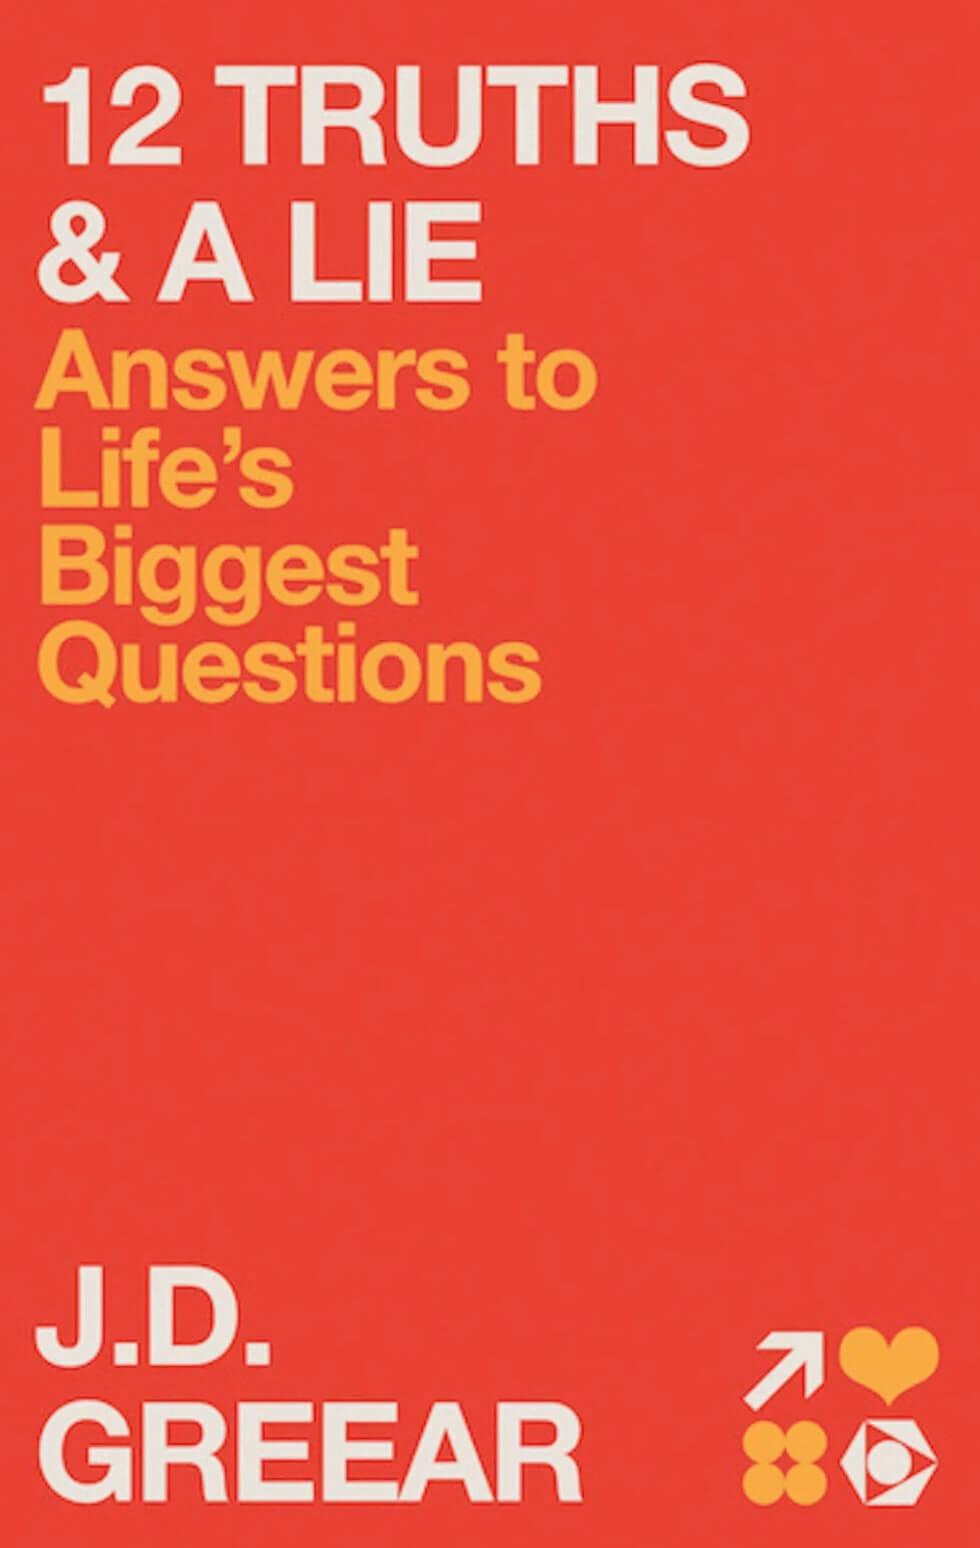 Cover of the book "12 Truths and a Lie: Answers to Life's Biggest Questions"